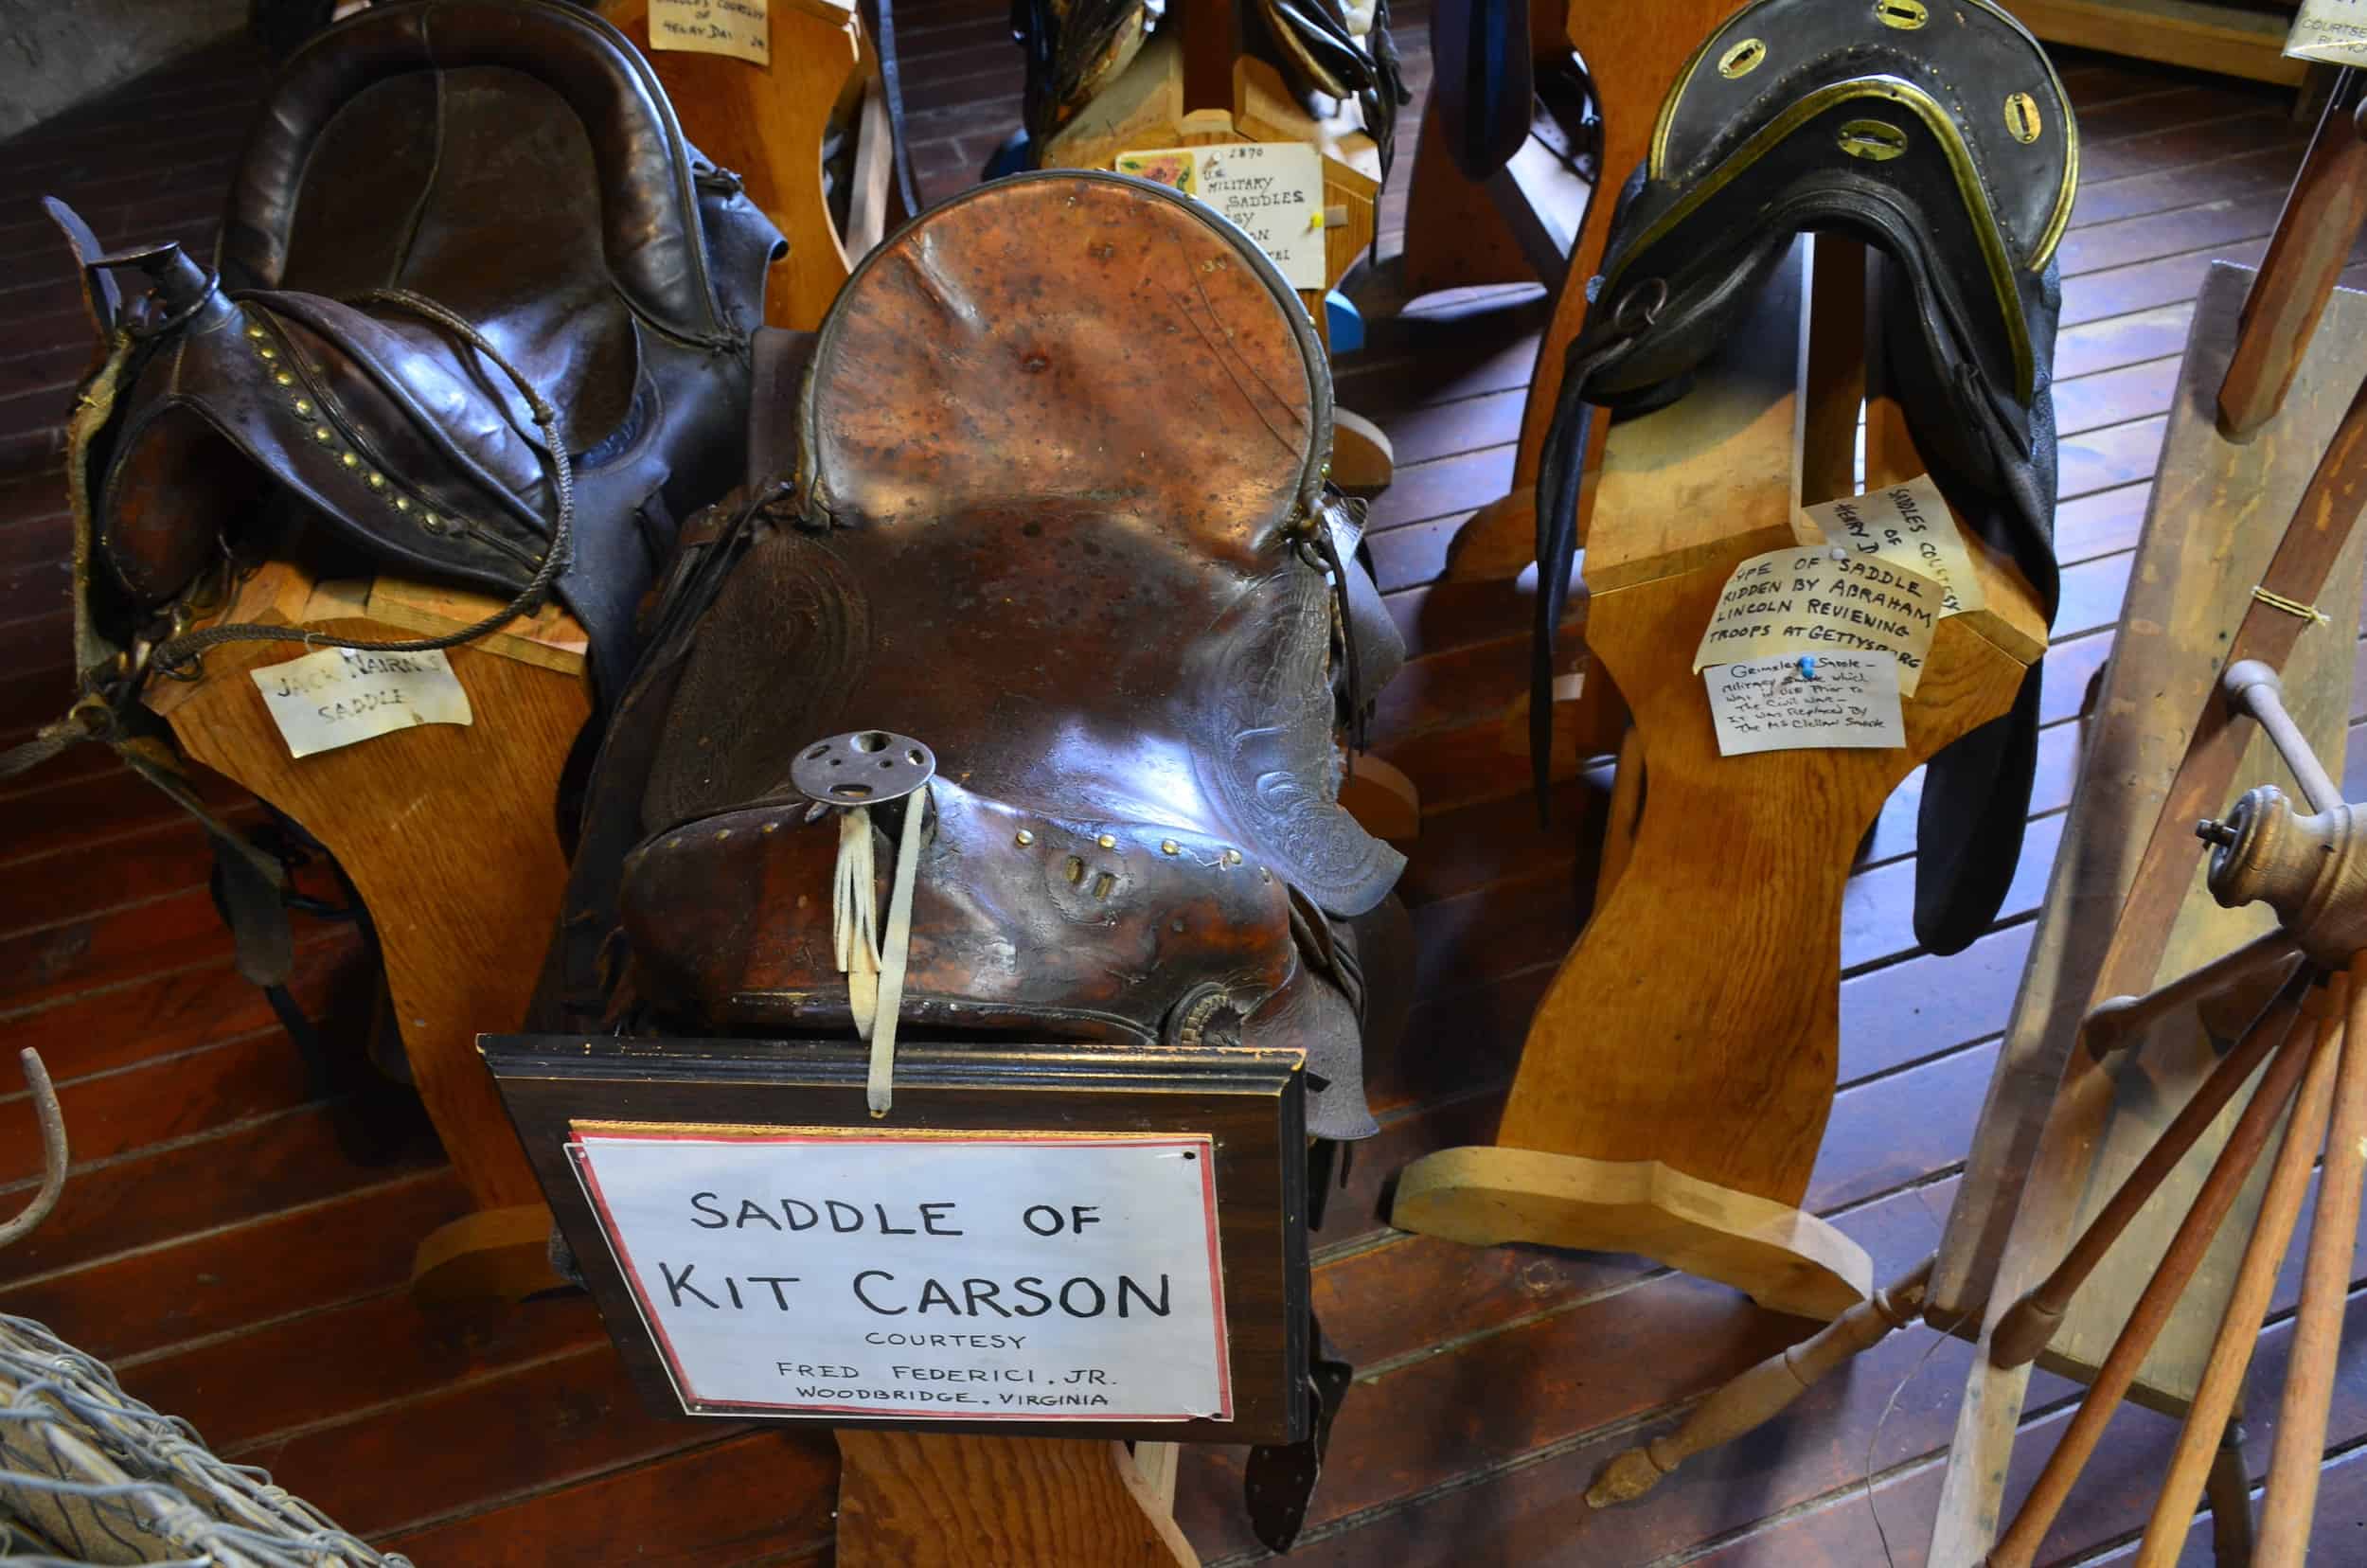 Saddle of Kit Carson at the Old Aztec Mill Museum in Cimarron, New Mexico